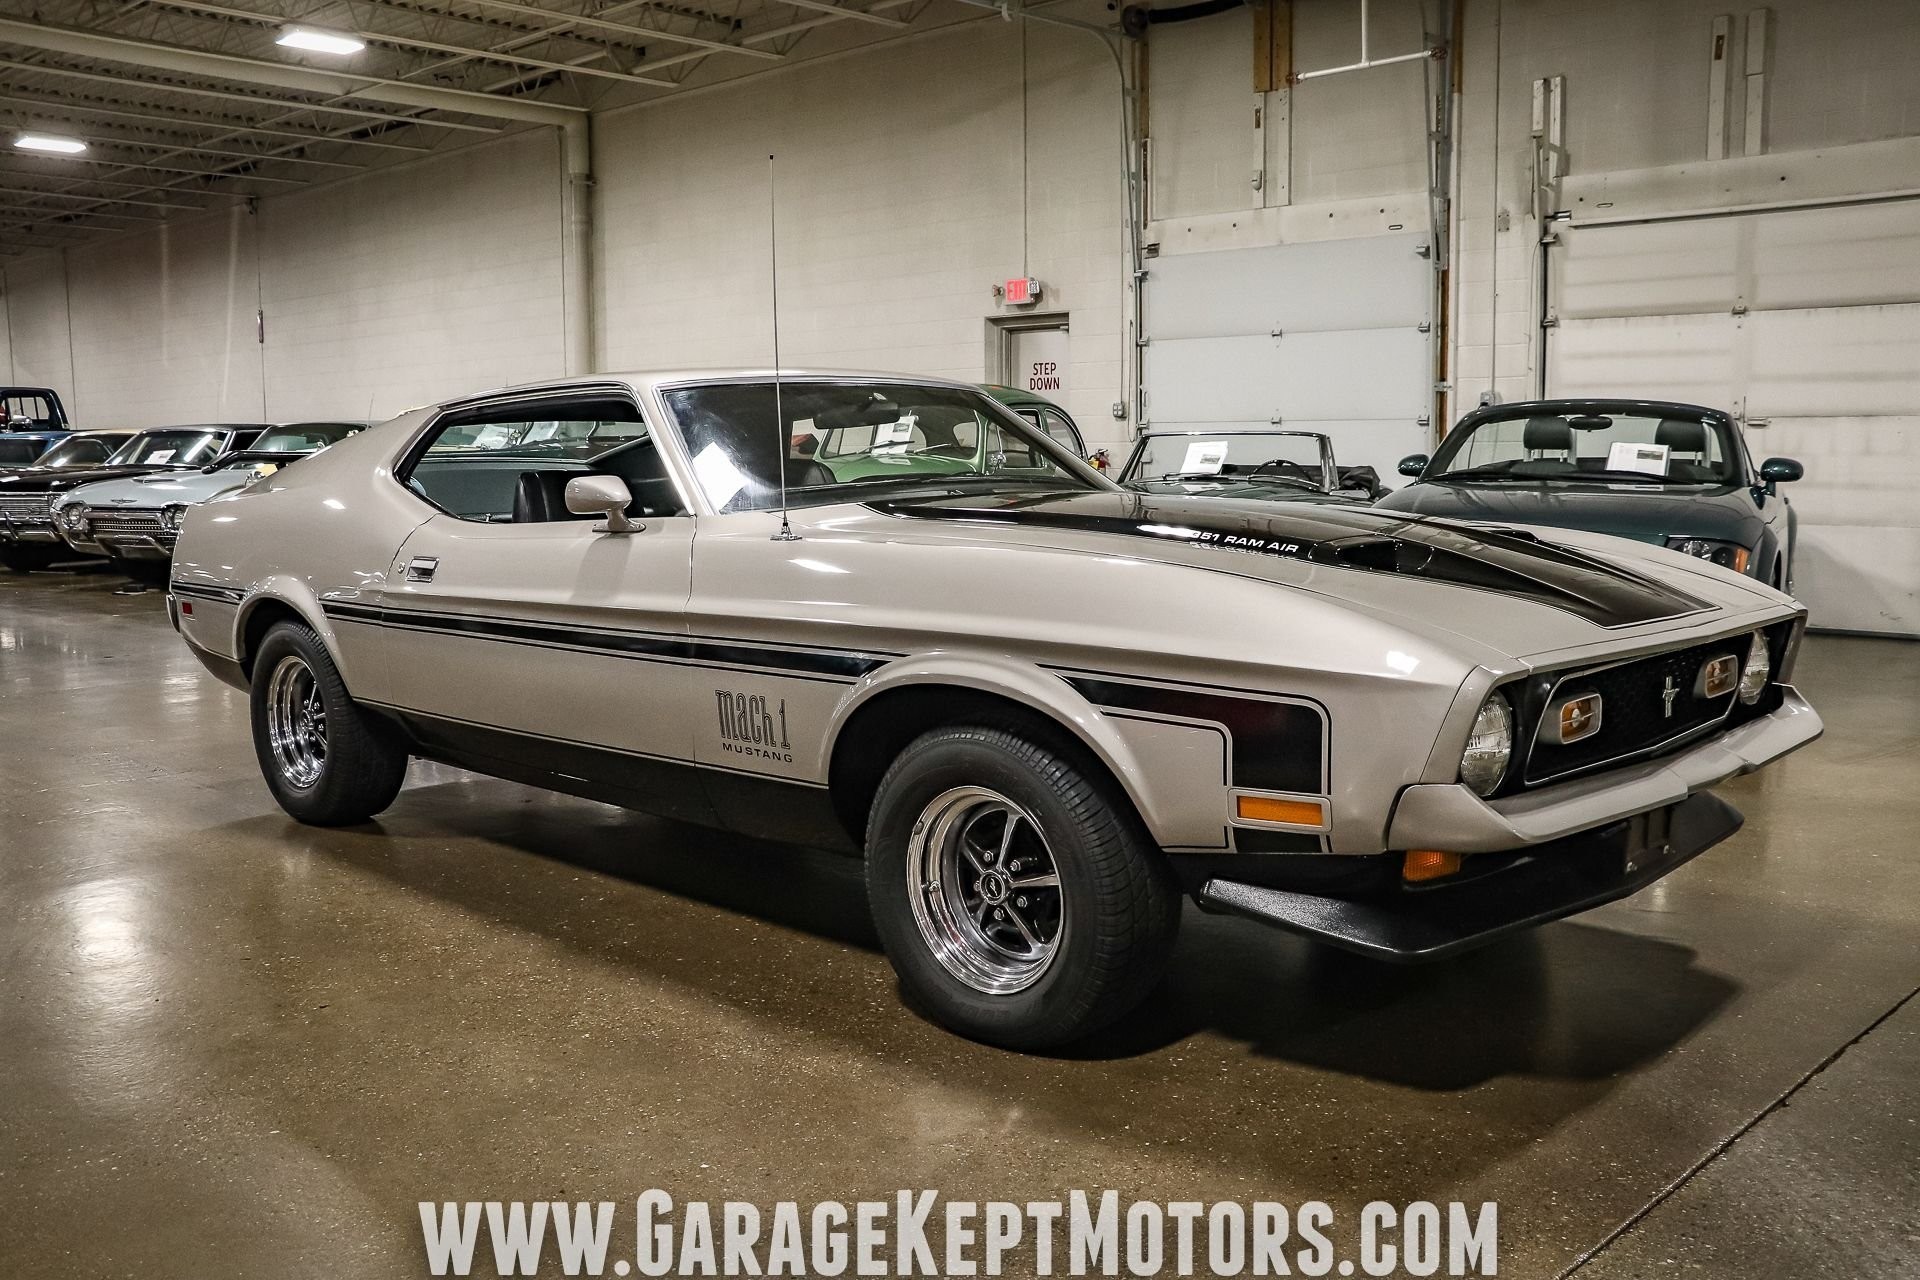 Restored 1971 Ford Mustang Mach 1 Serves as a Tantalizing SportsRoof ...